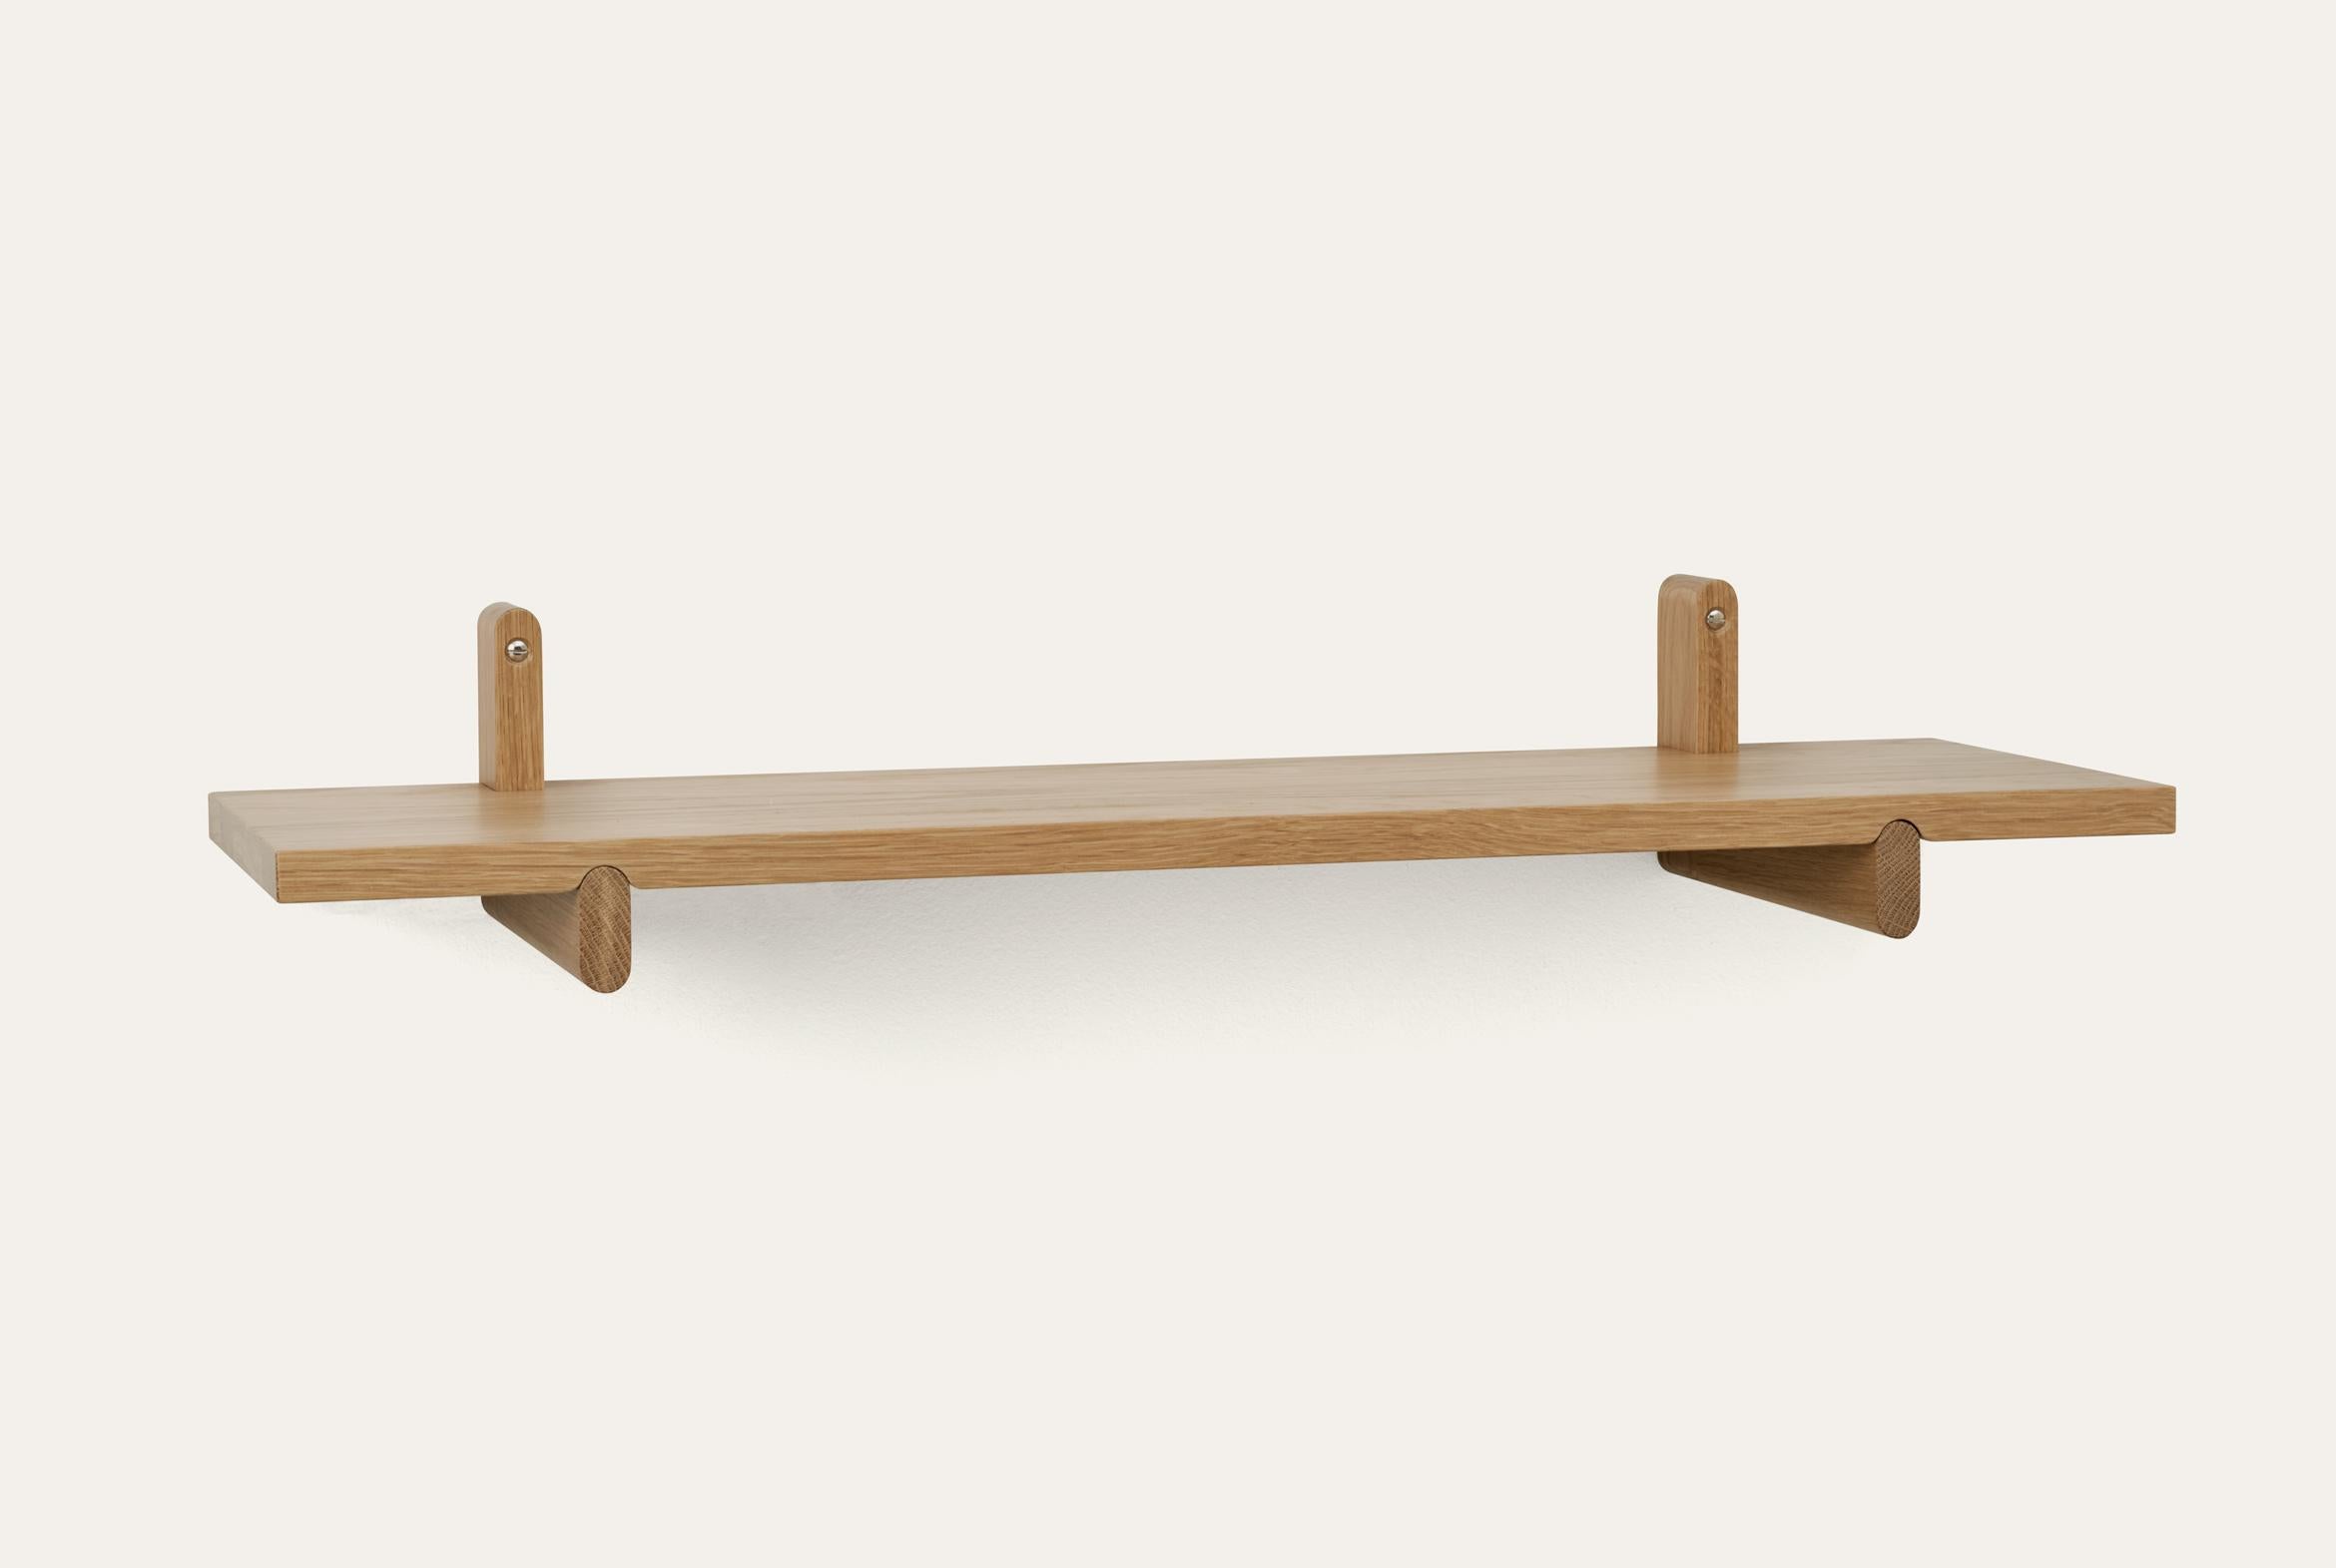 Natural Rondelle shelf by Storängen Design
Dimensions: D 80 x W 25 x H 18 cm
Materials: oak wood.
Available in other colors and with or without steel hanger.

Rondelle can be a shelf or a small table depending on your needs. It shares the same